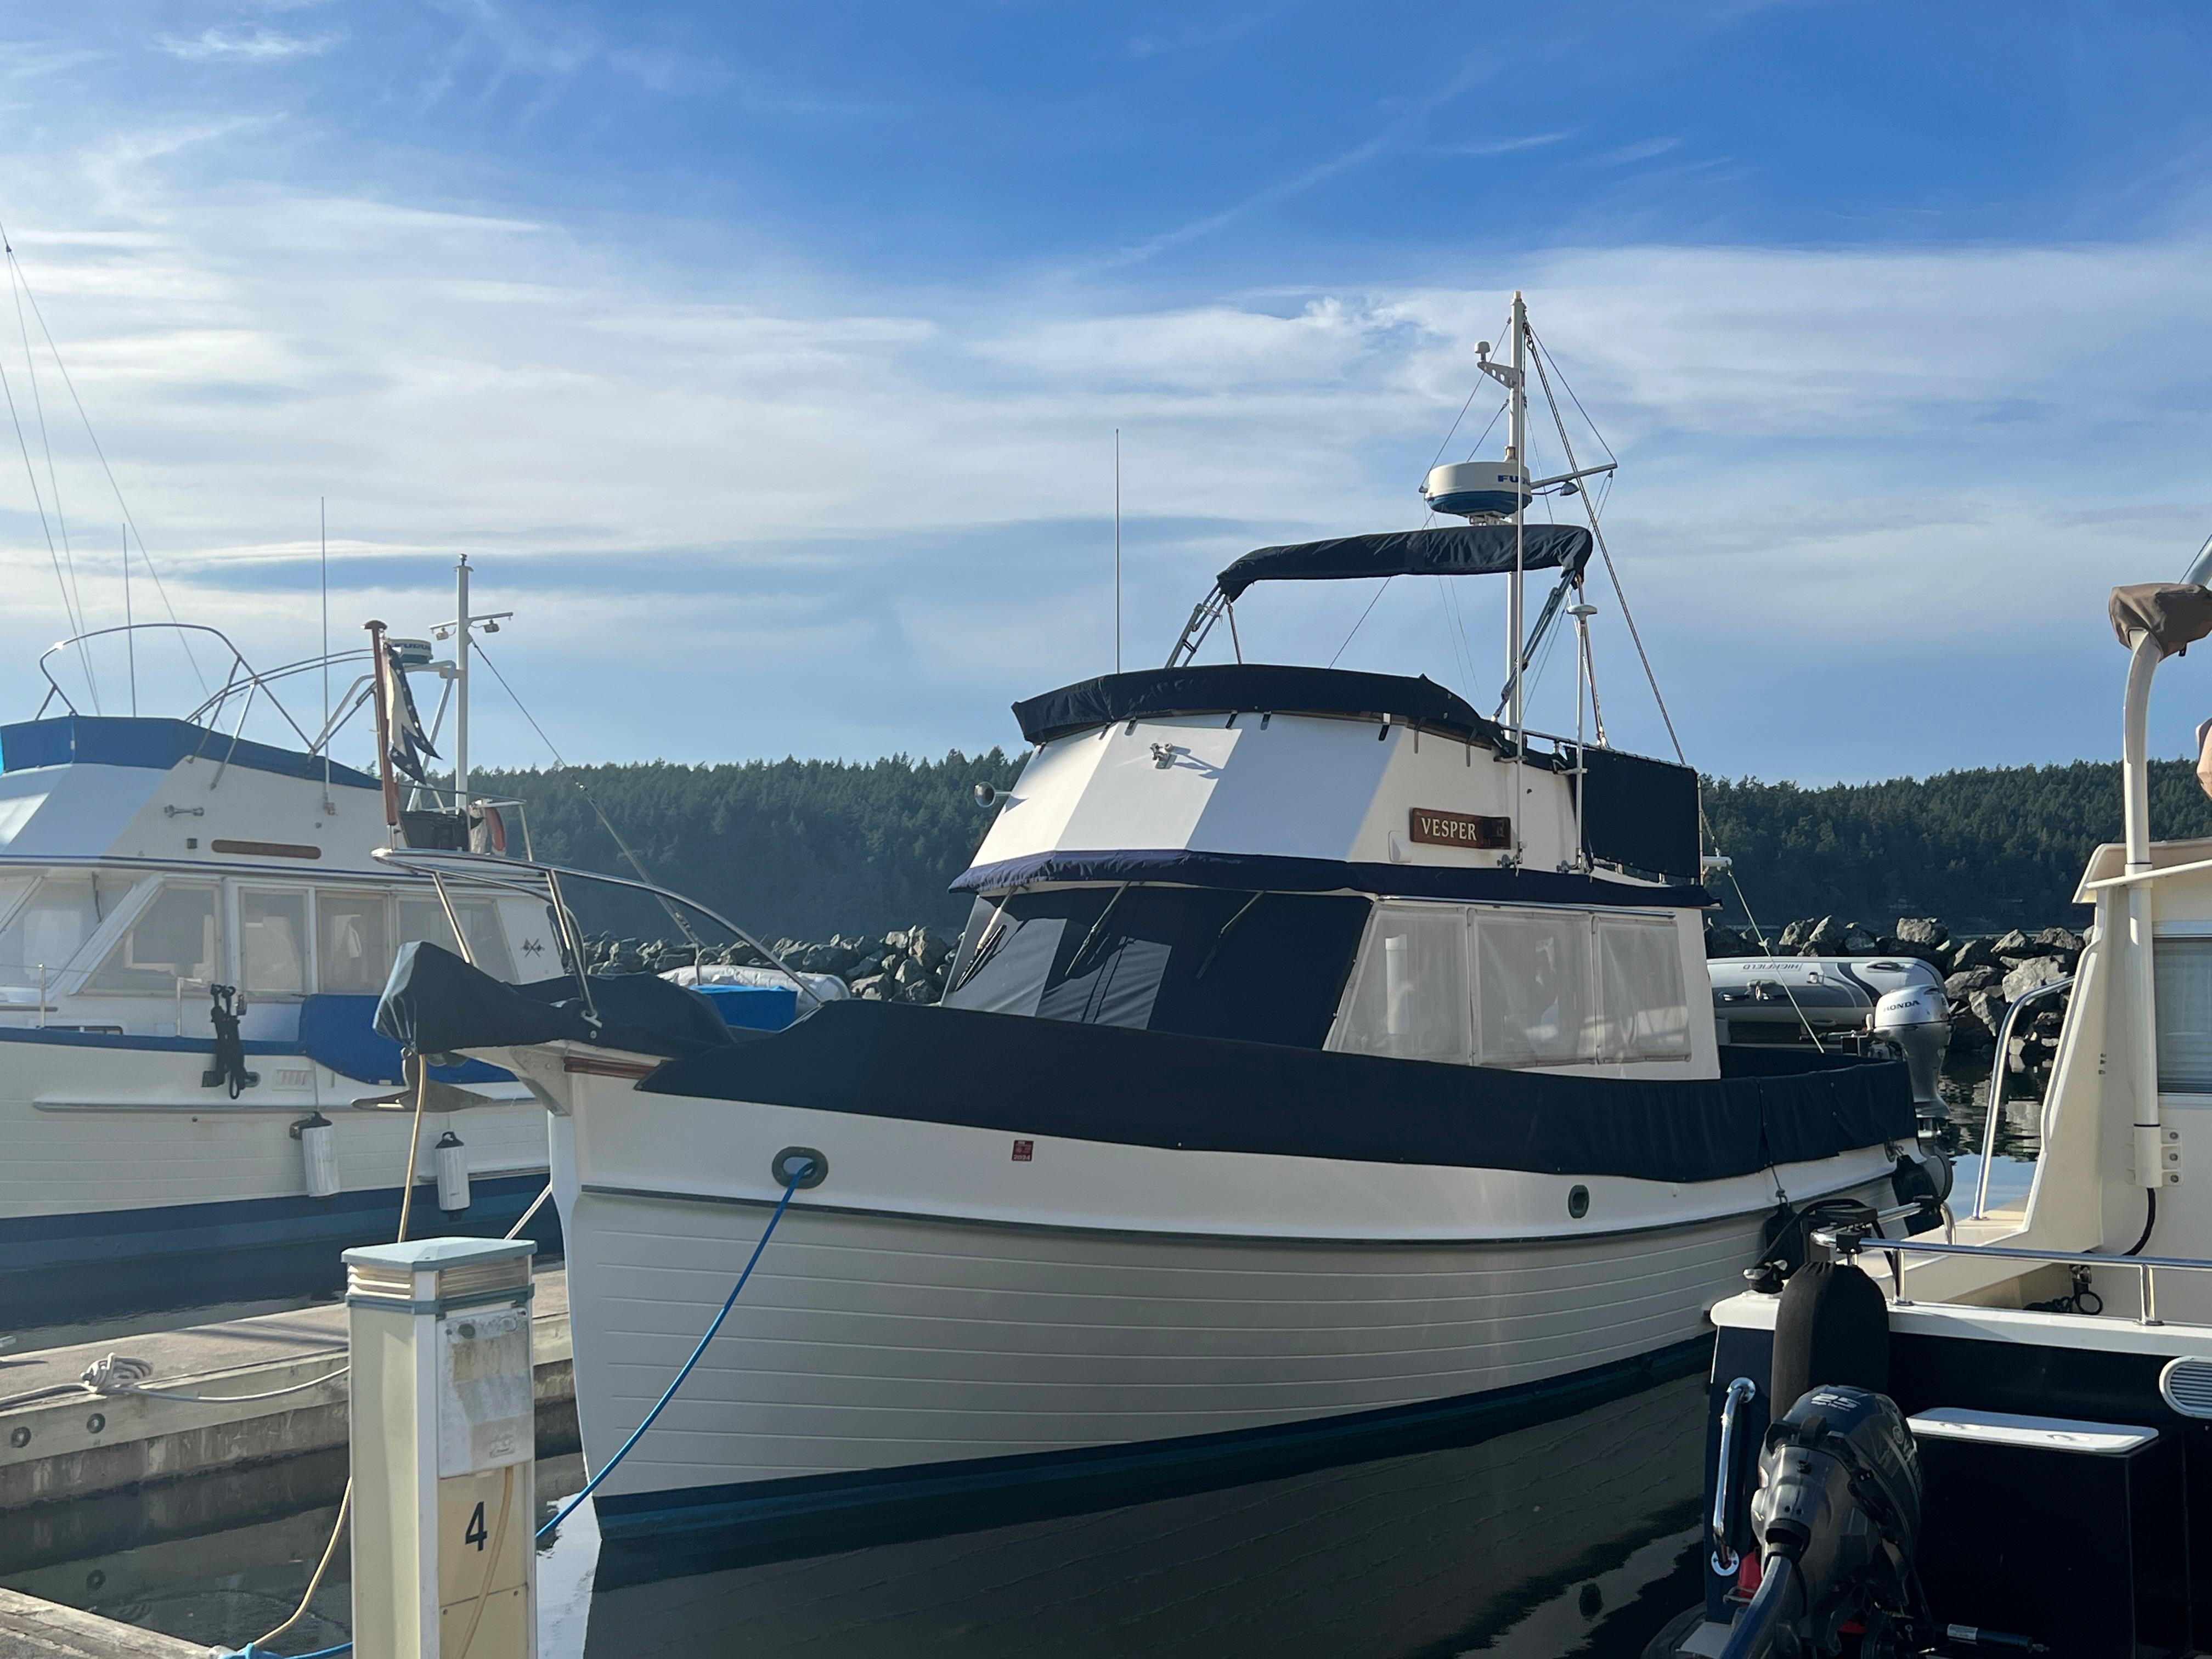 Used 1990 Grand Banks 32, 98261 Lopez Island - Boat Trader